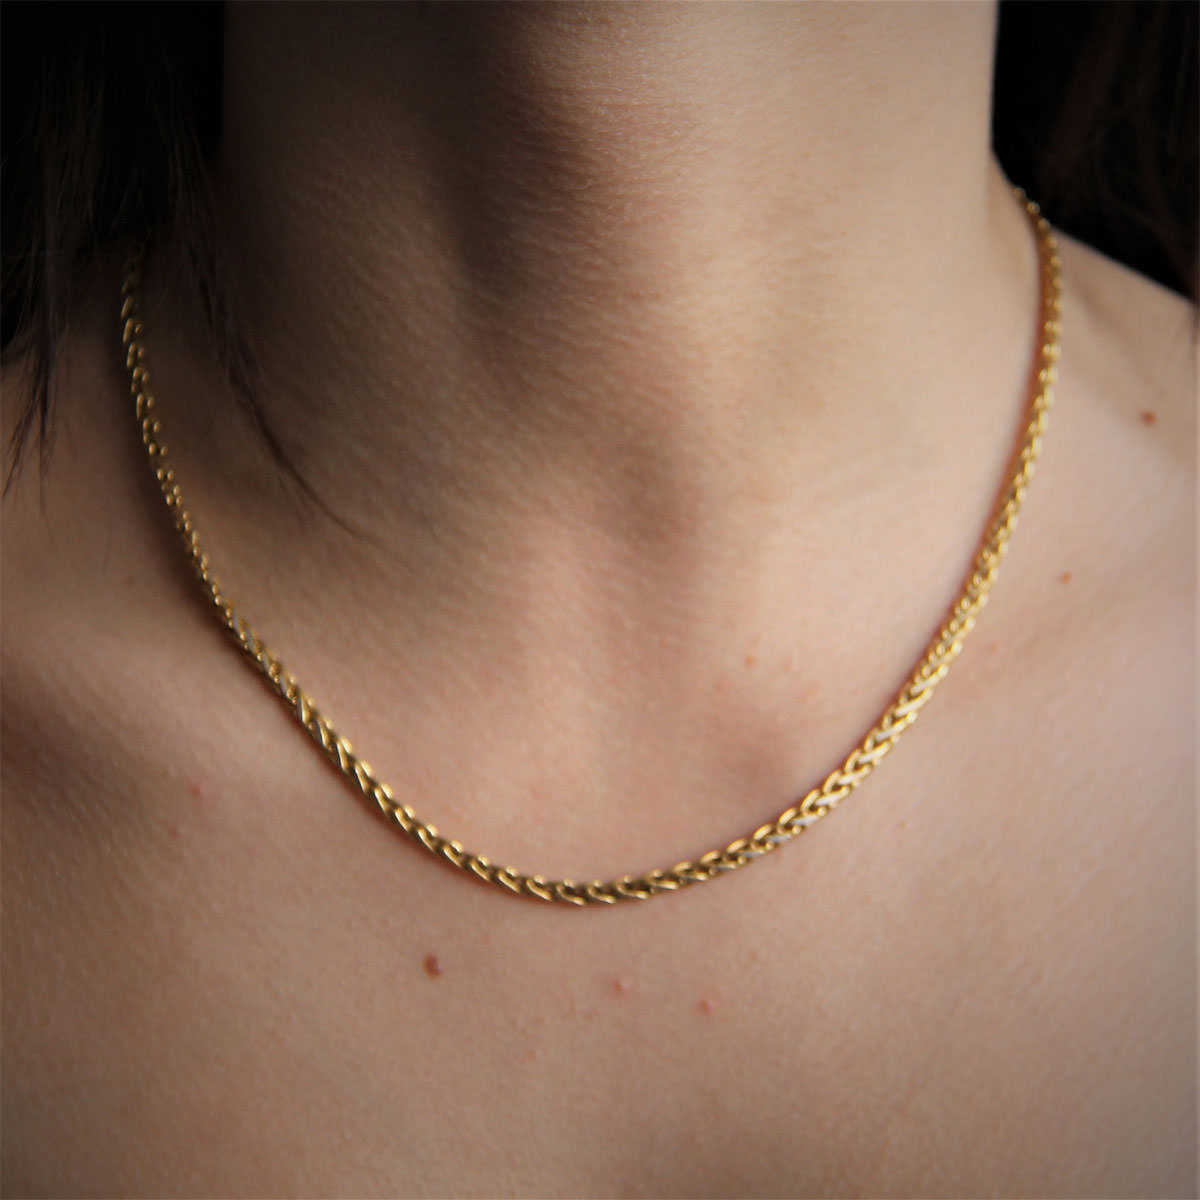 Collier Or 18k, 750/000 Maille Fantaisie 11.2grs